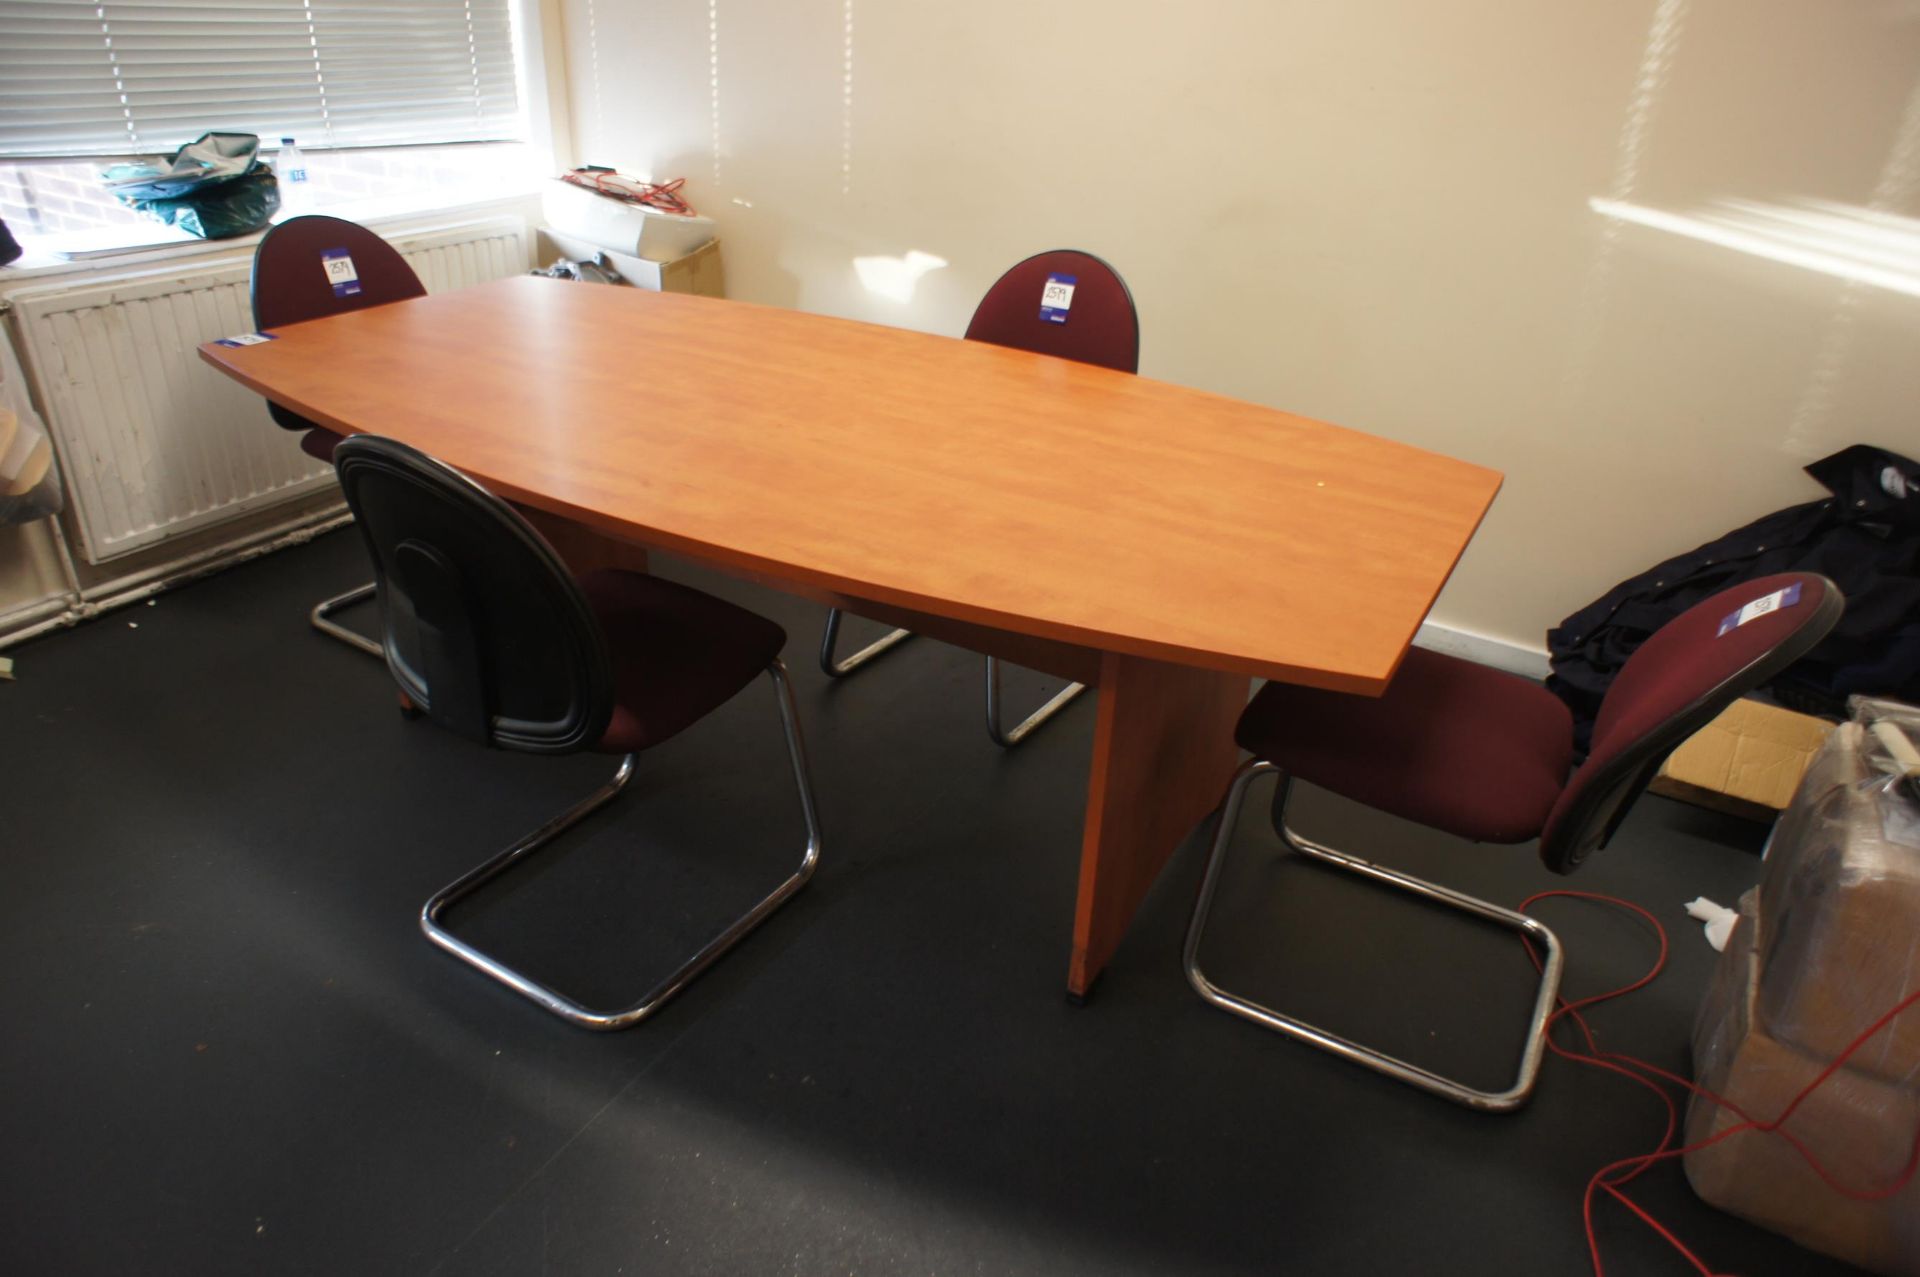 Cherry Effect Shaped Meeting Room Table 2200 x 1100 with 4 Upholstered Chairs